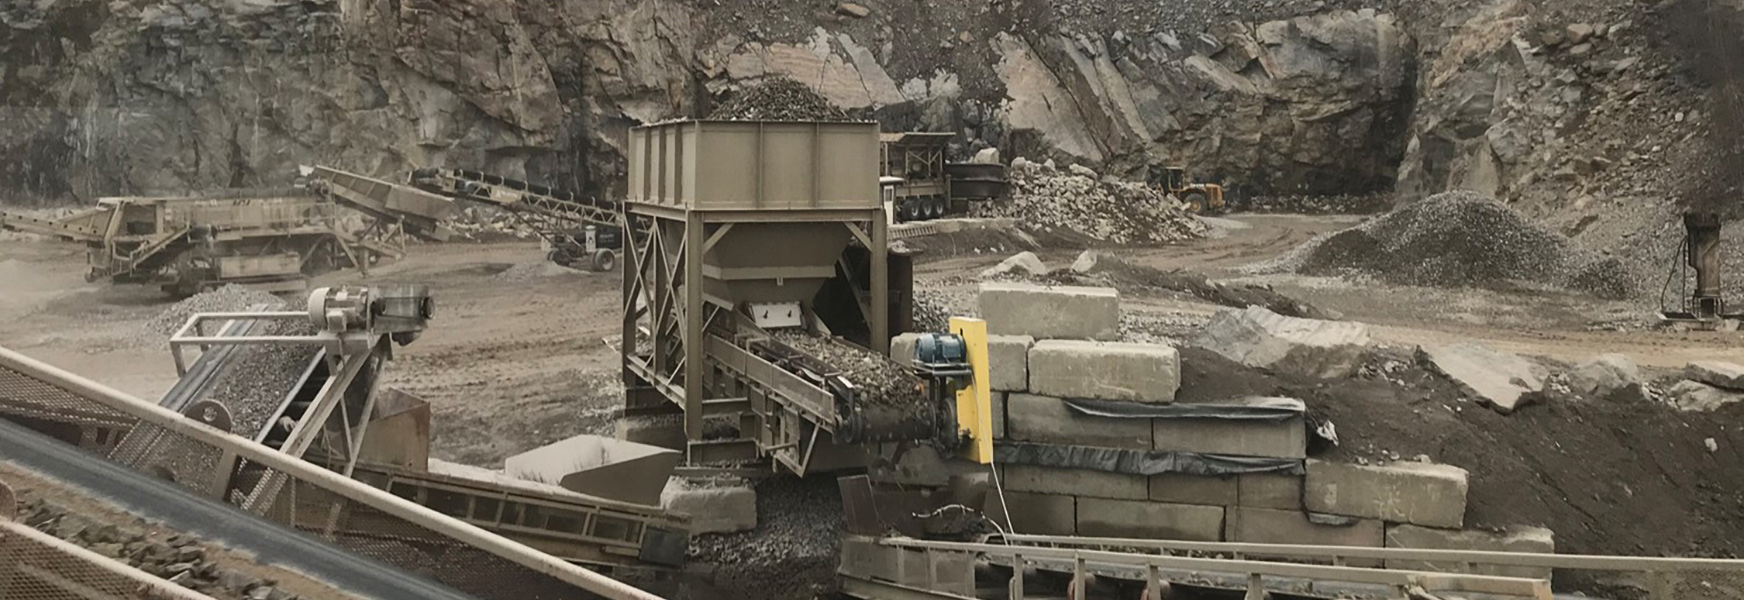 rock crusher on site